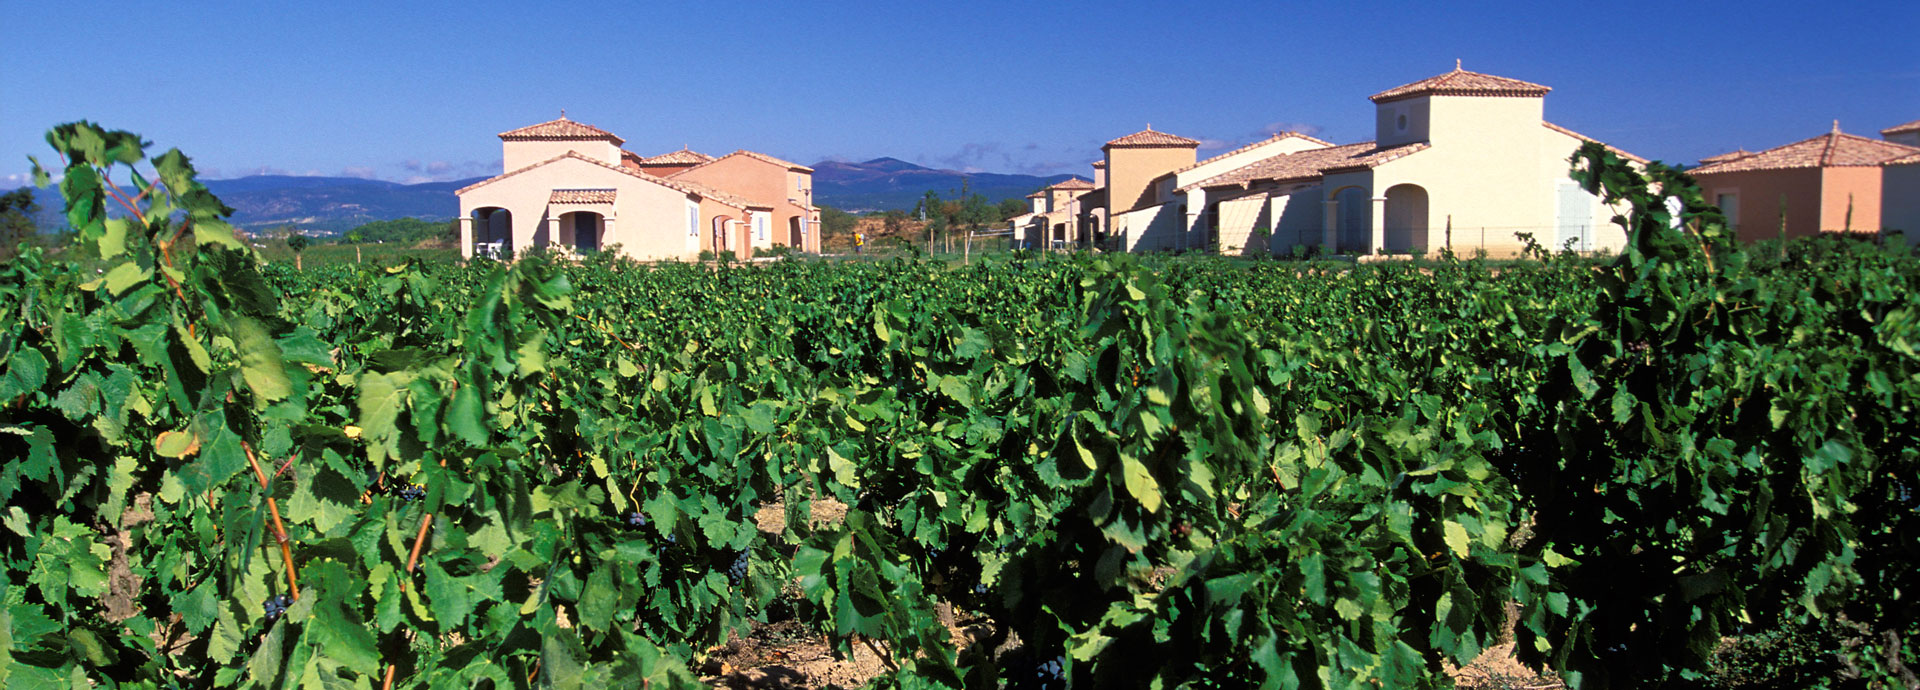 Homps in Languedoc-Roussillon in the heart of Cathar country : holiday rental in Aude